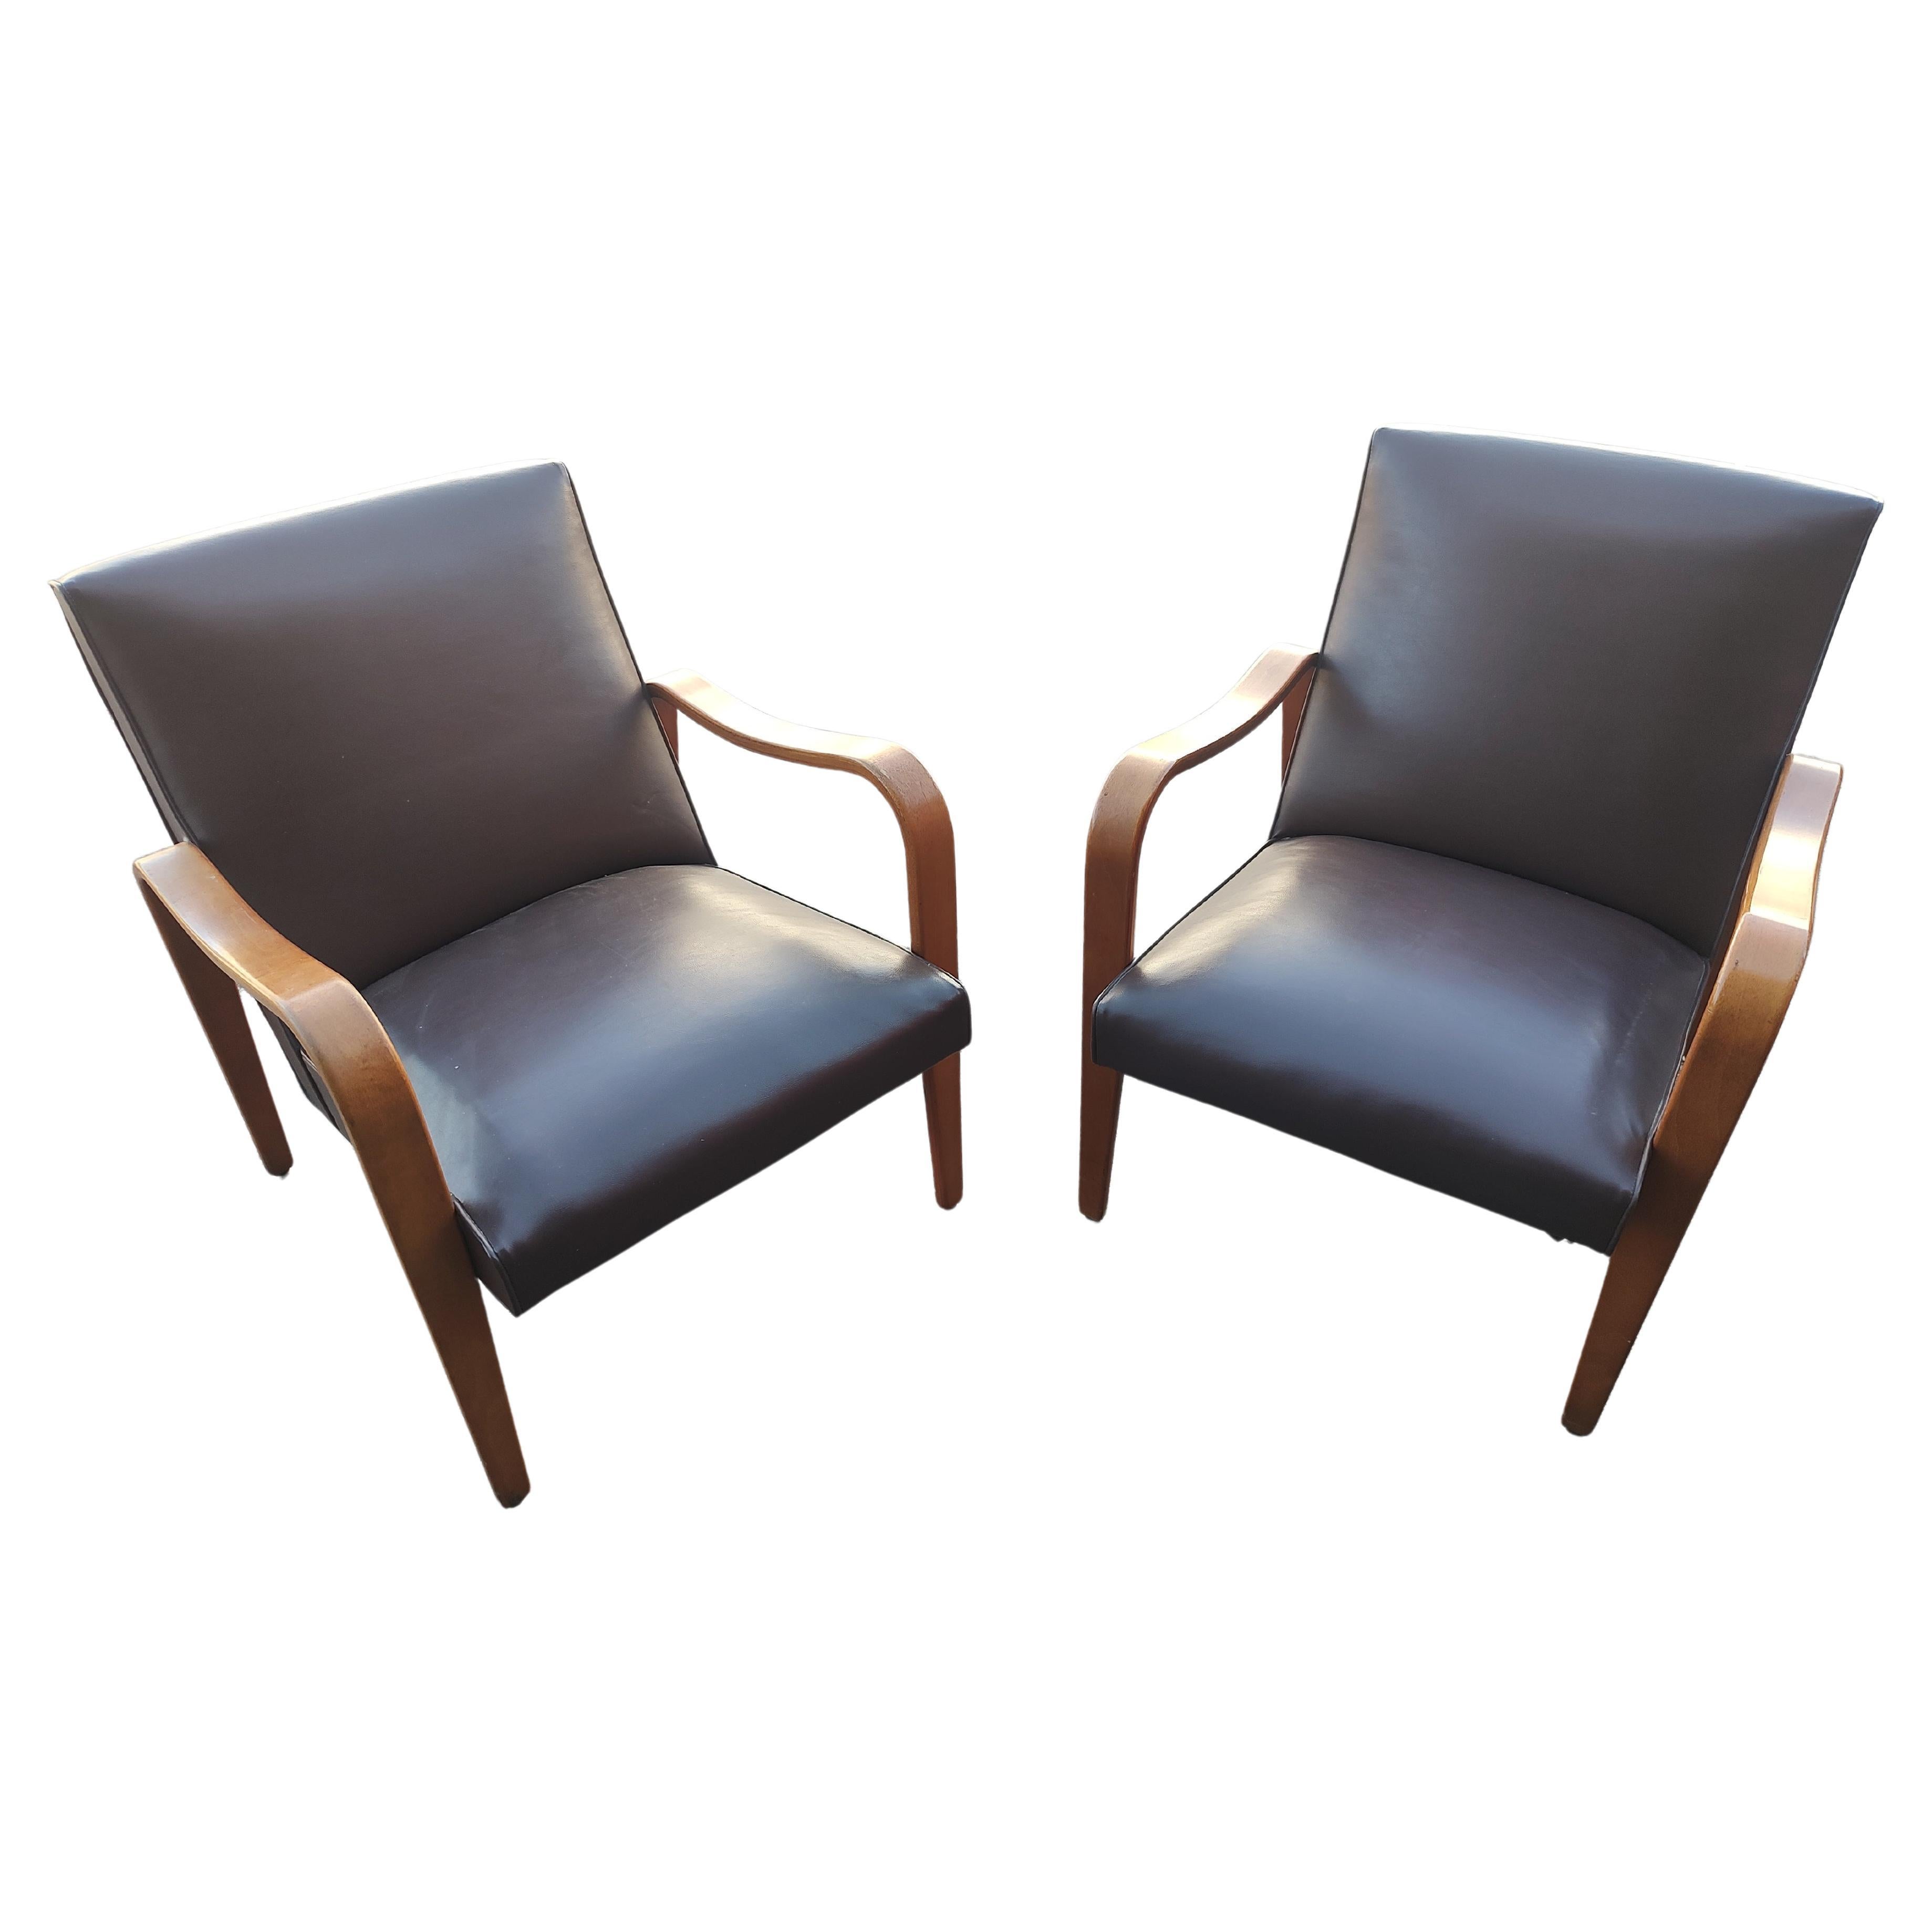 Fabulous pair of Mid Century Modern Sculptural Lounge Chairs by Thonet in Bent arm Birch with the original Naughahyde upholstery. In excellent vintage condition with minimal wear. Some minor paint splatter on one seat. See pic. Priced and sold as a